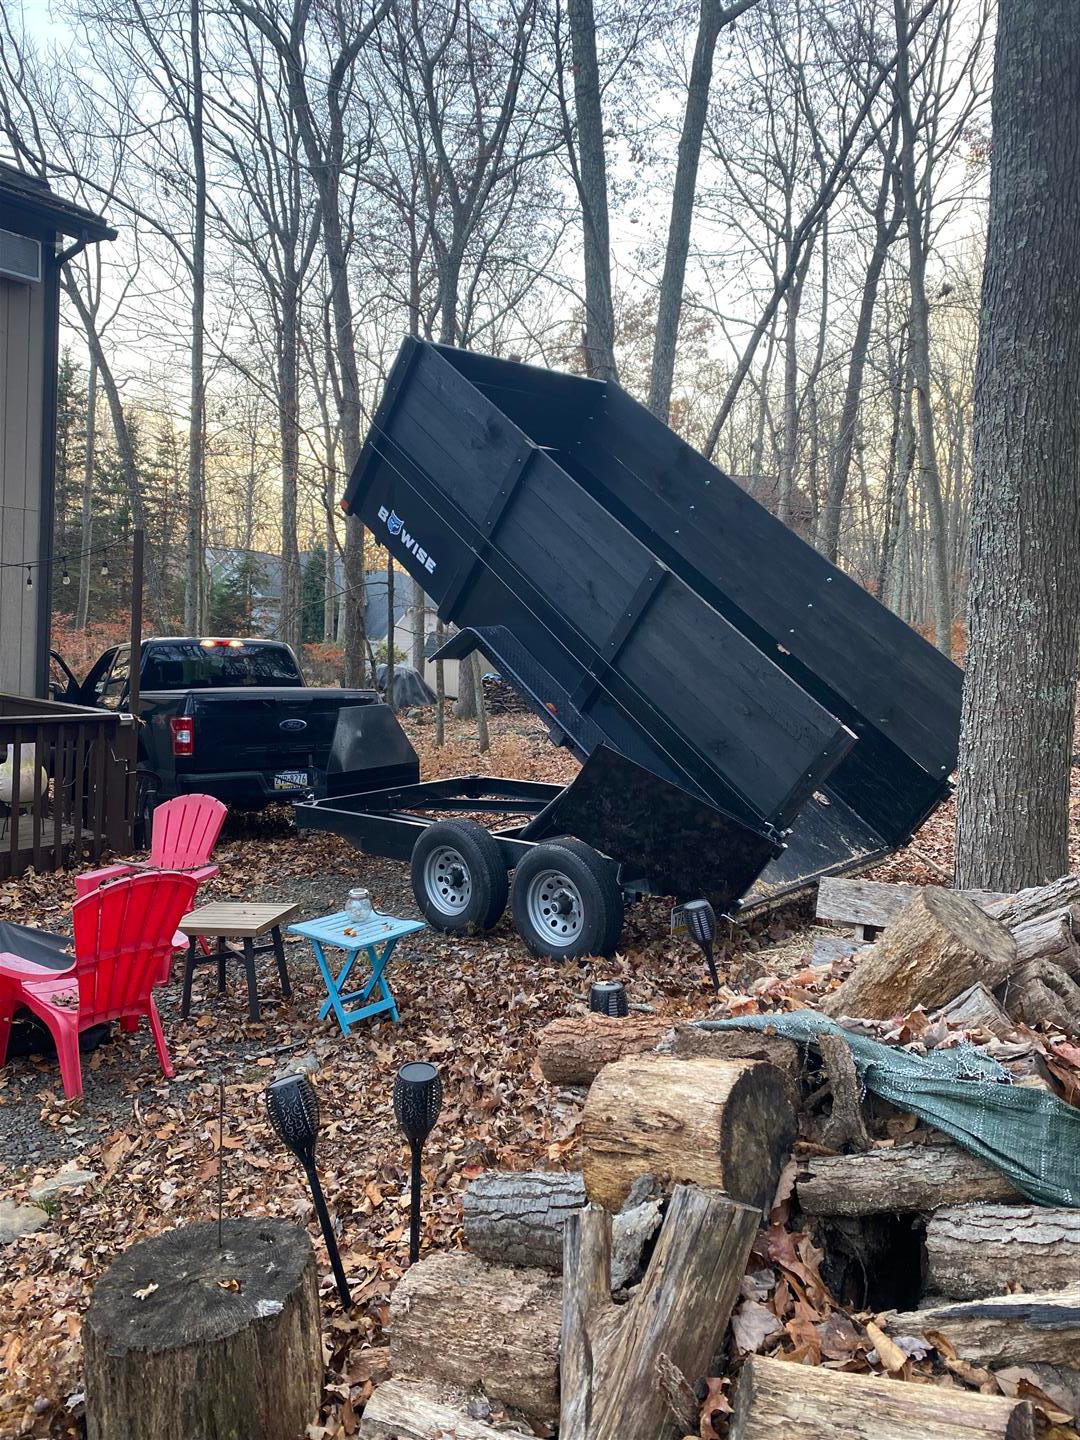 Maintain a pristine outdoor space with DnA Delivery & Junk Removal's yard debris removal services. Our skilled crew will swiftly remove leaves, branches, and other yard waste to keep your property looking clean and tidy. Whether you have a small residential lawn or a larger commercial property, we'll handle your yard debris removal needs with care and efficiency.